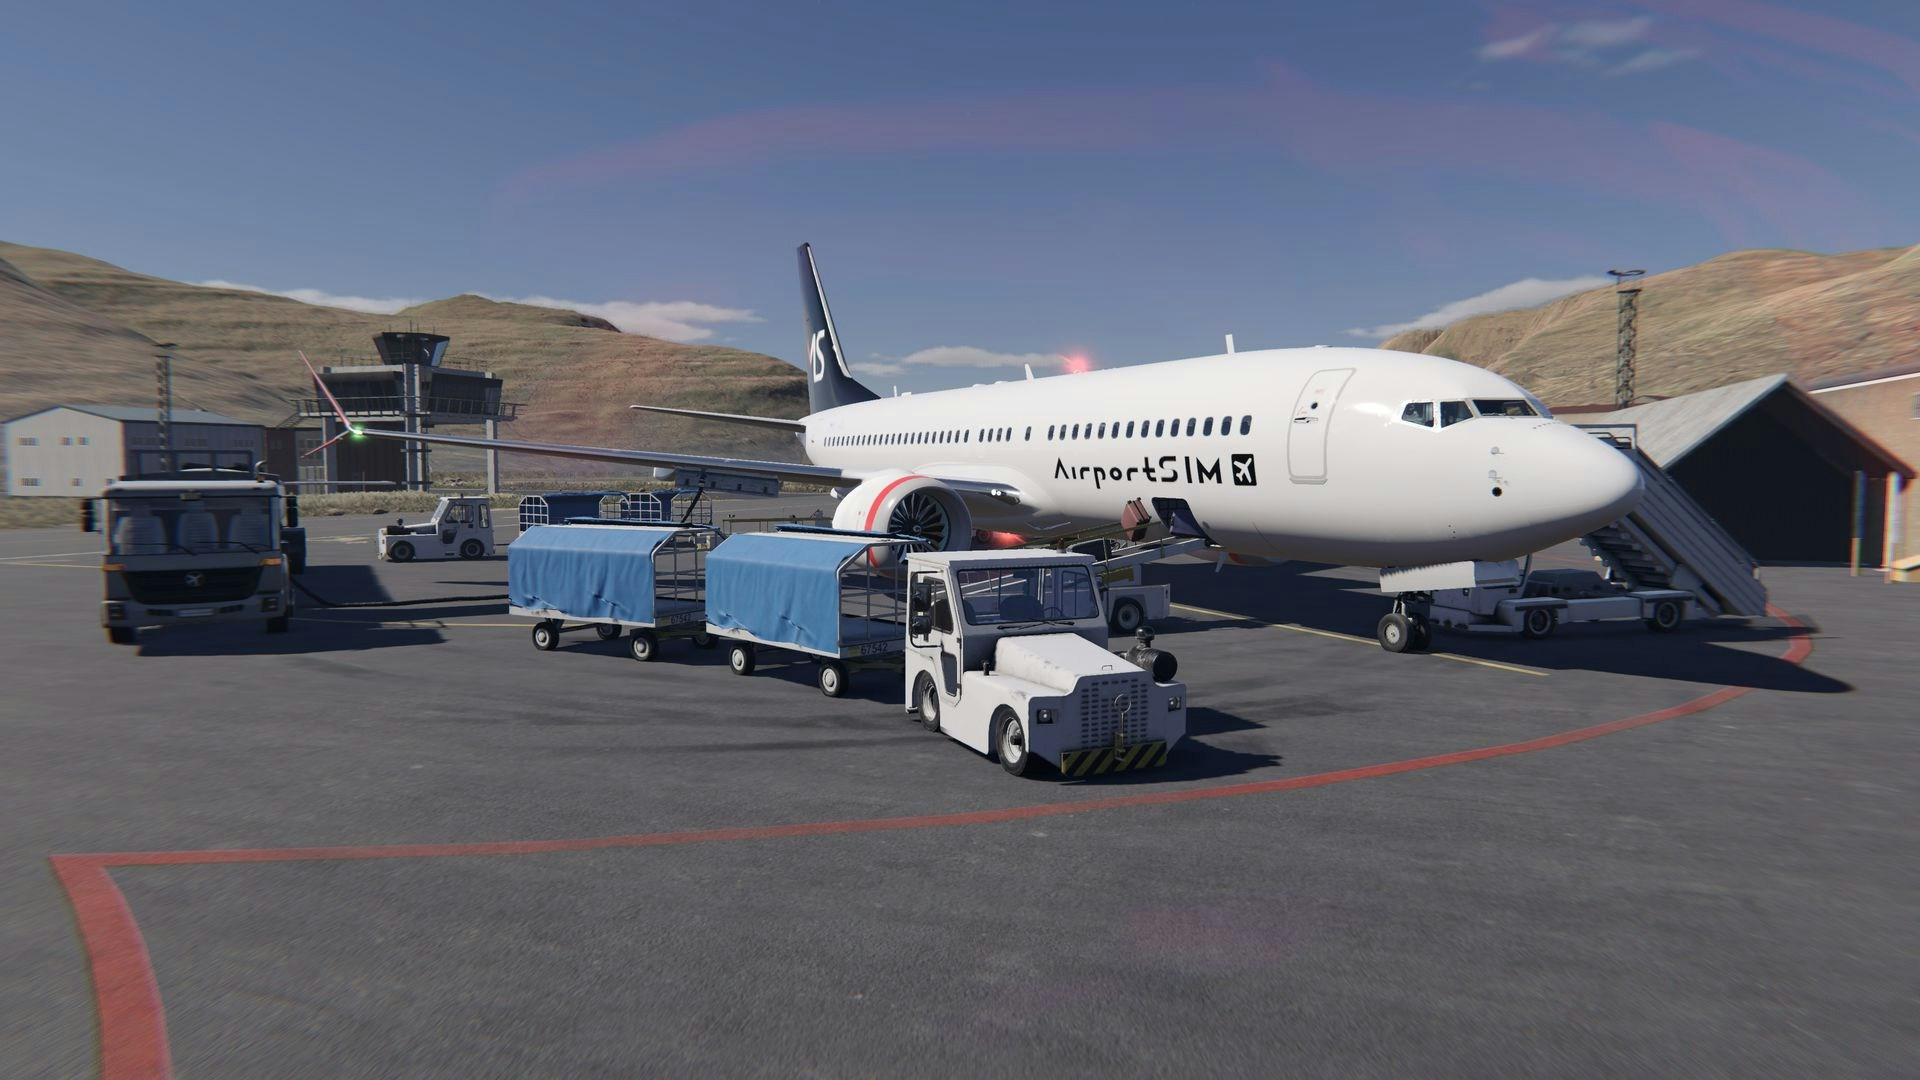 Experience the Life of a Ground Handler with AirportSim by MS Games